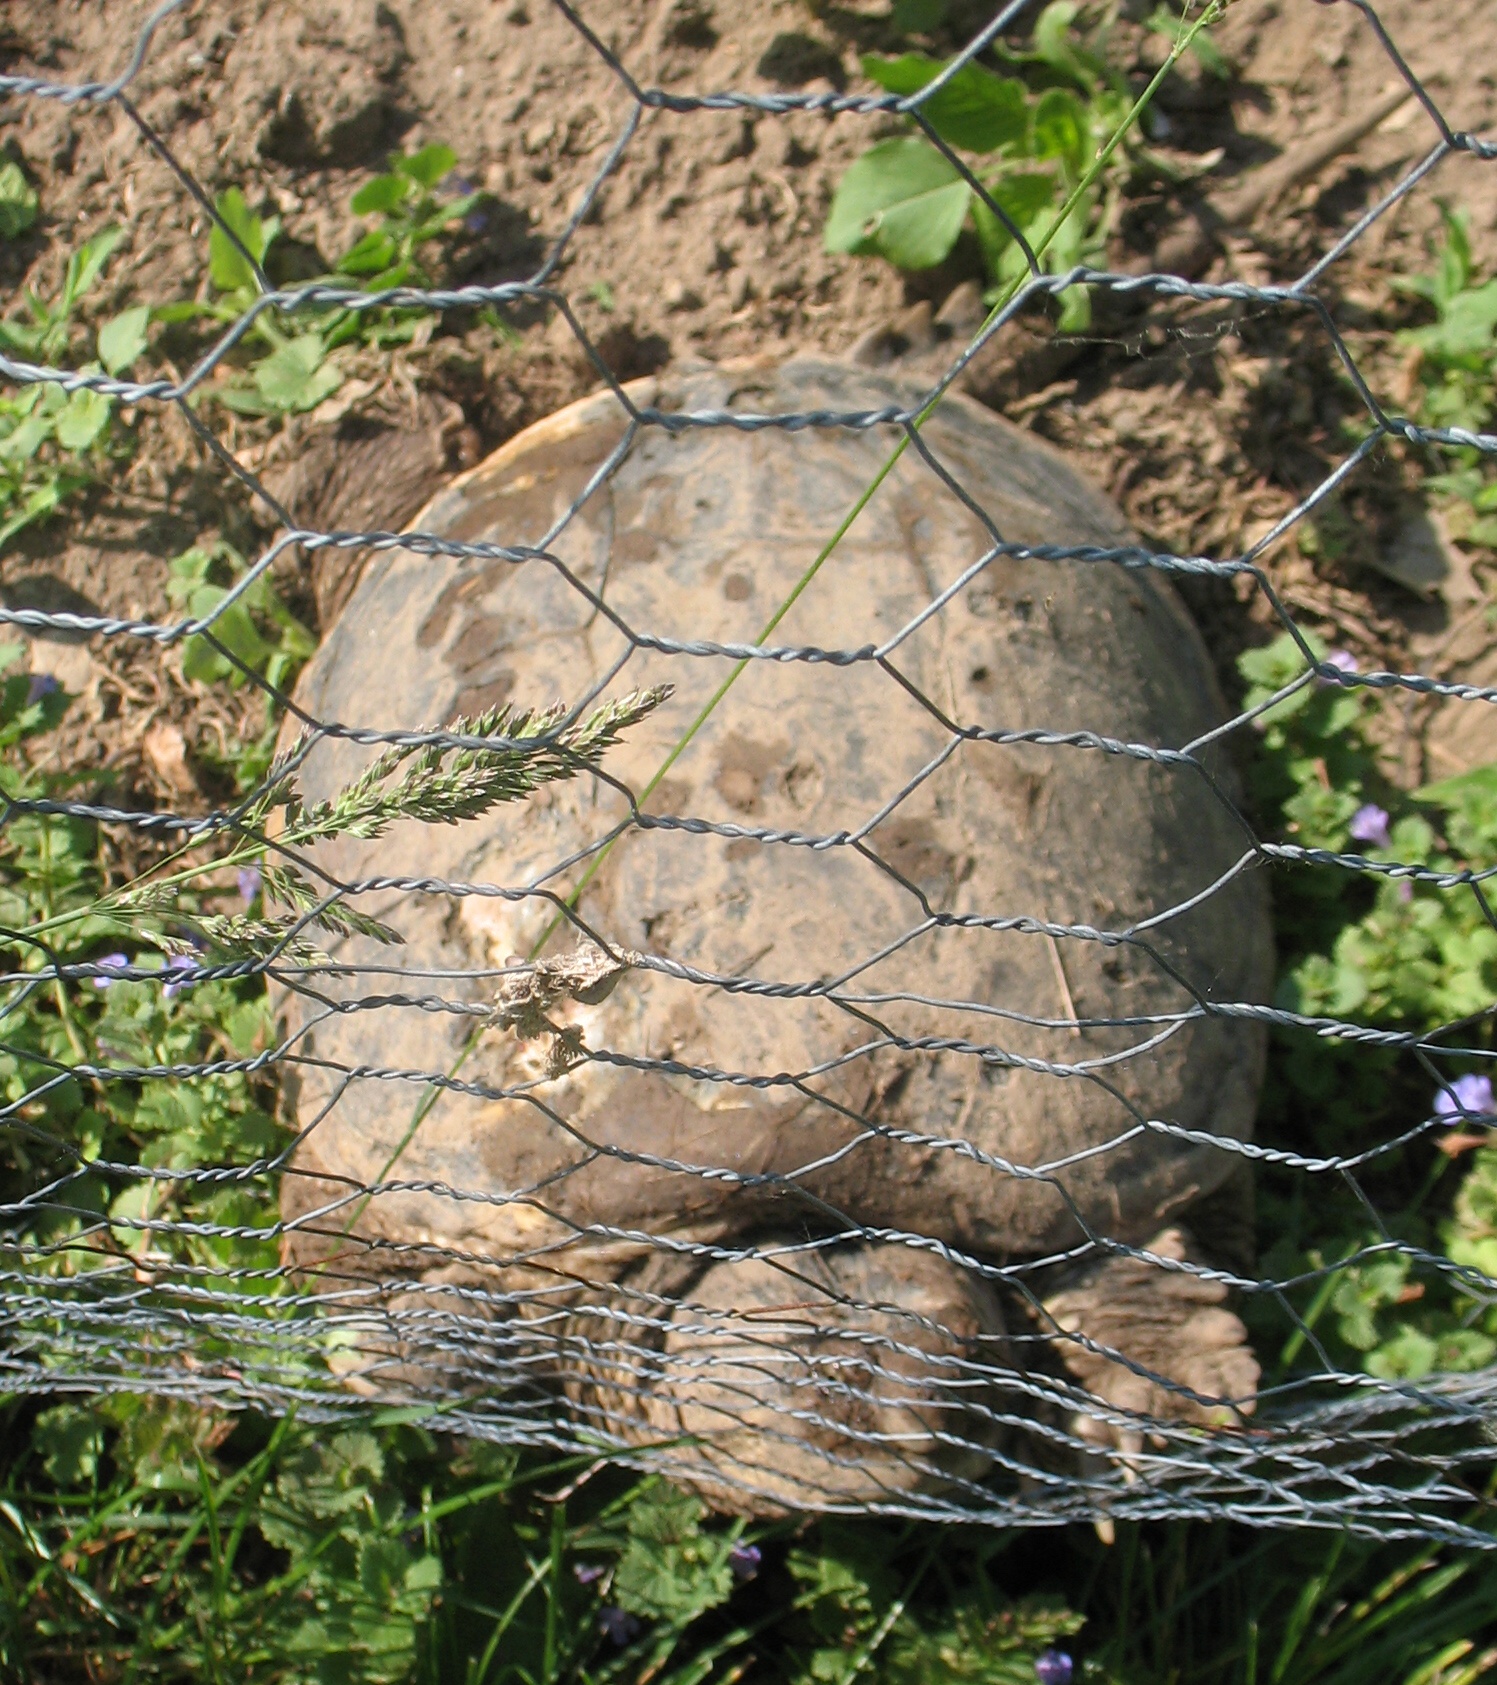 The turtle trying to leave our vegetable garden through the chicken-wire fence